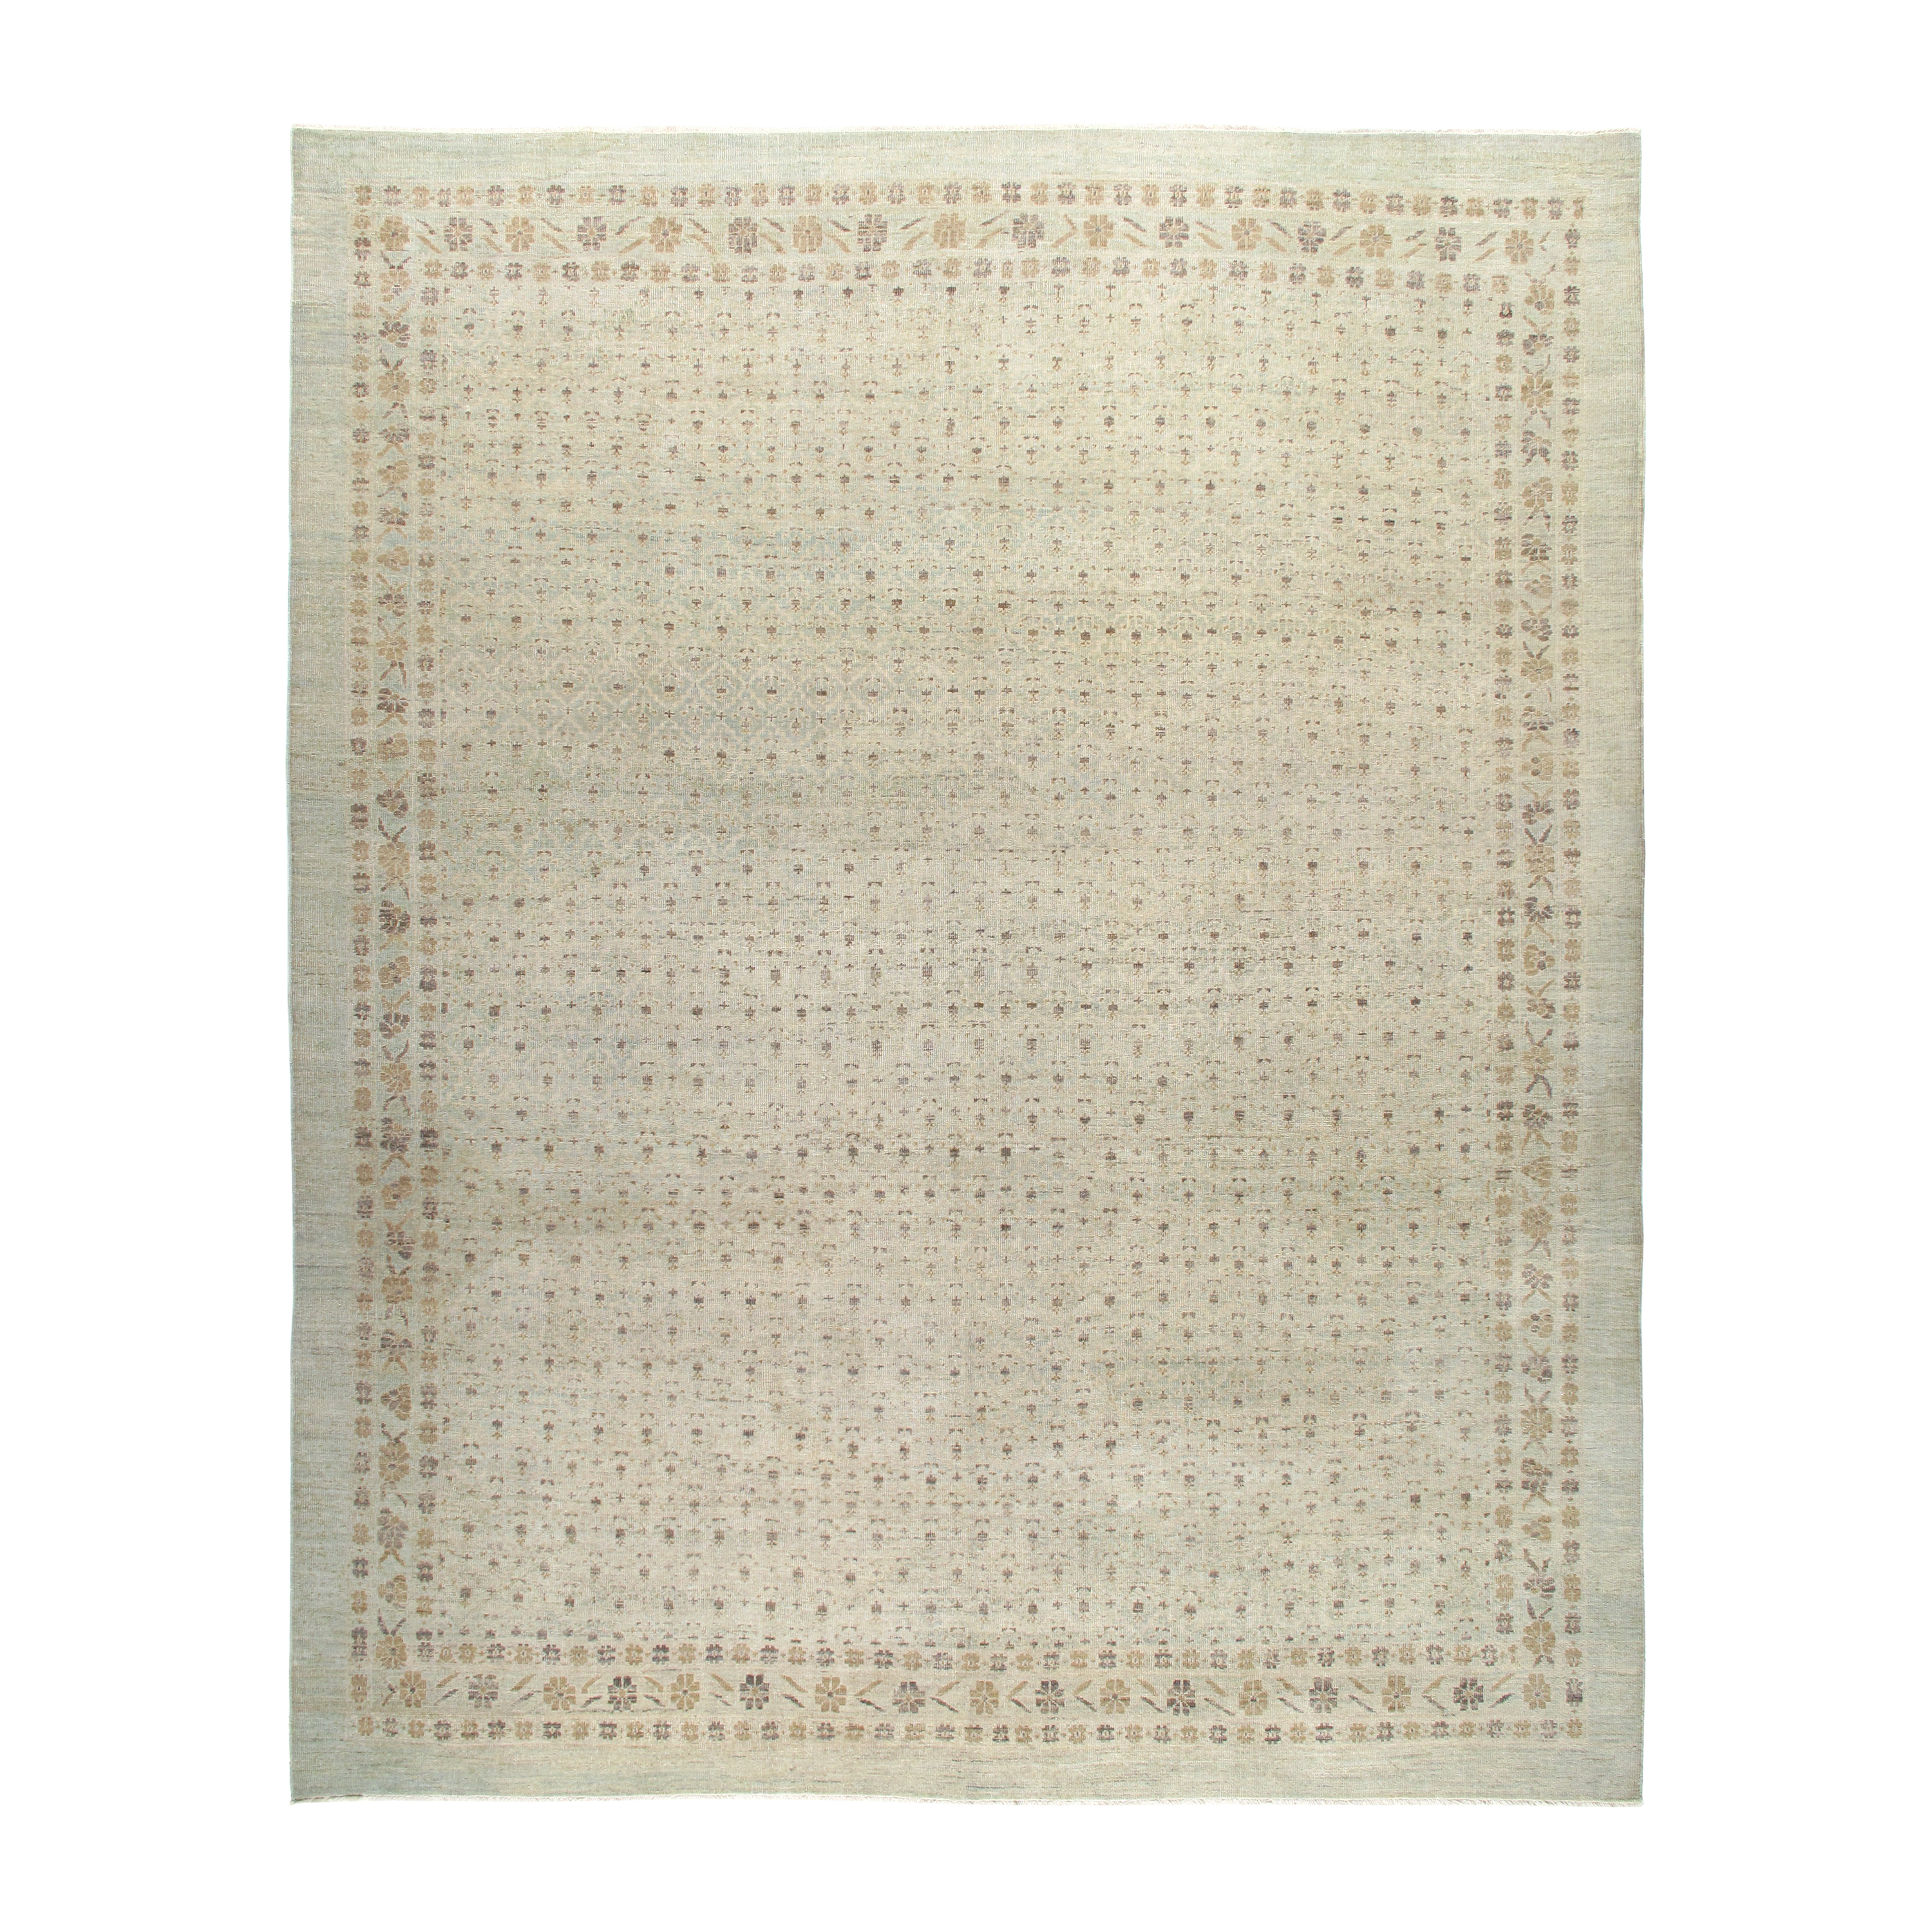 This Kurdish rug is made of hand carded Persian wool and natural dye. 